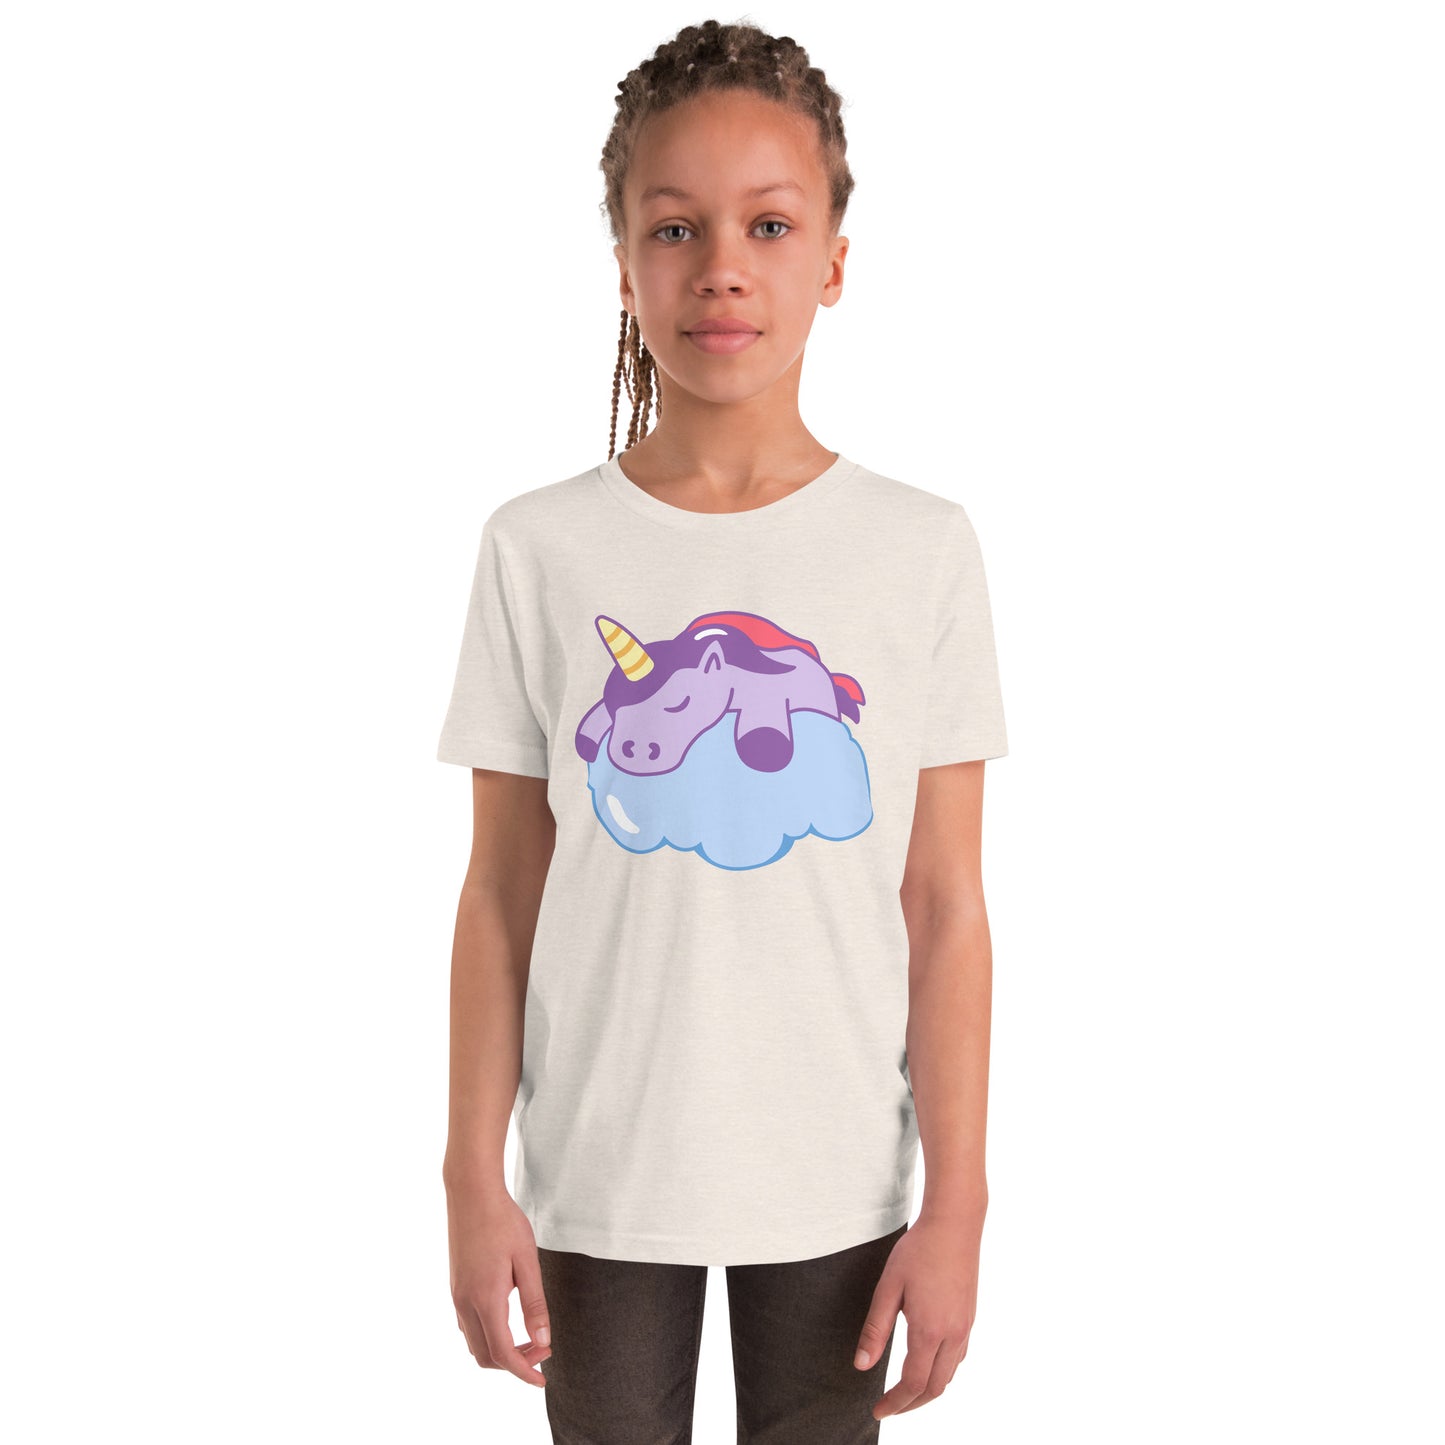 Youth with a heather dust T-shirt with a print of a sleeping unicorn on a cloud